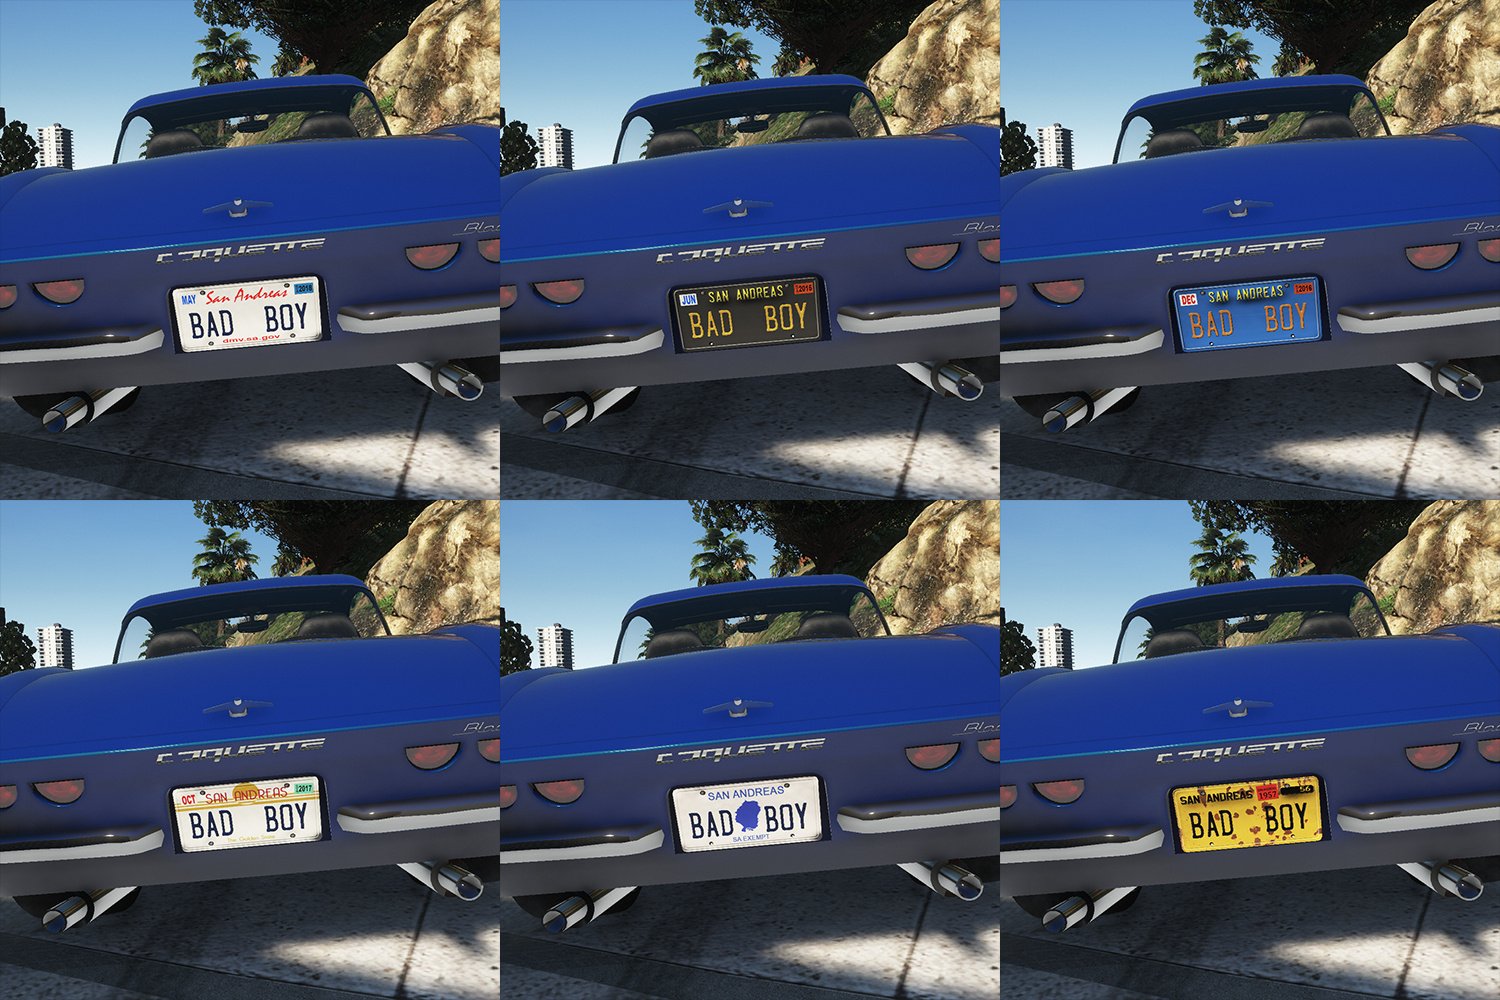 gta online custom license plate not showing up